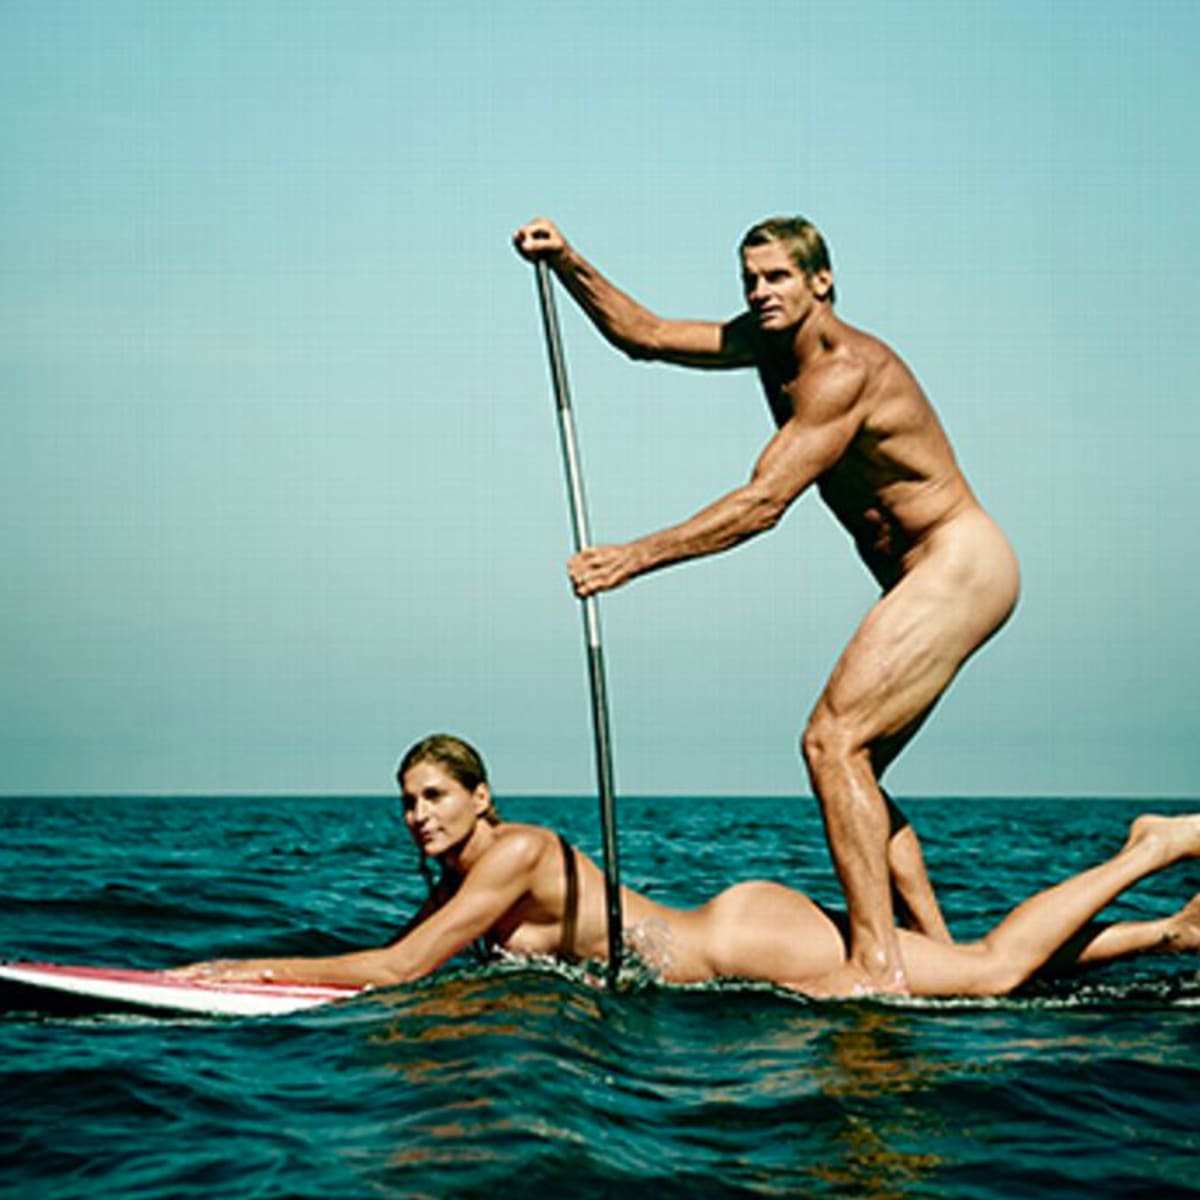 Laird Hamilton and Wife Bare It All For ESPN pic